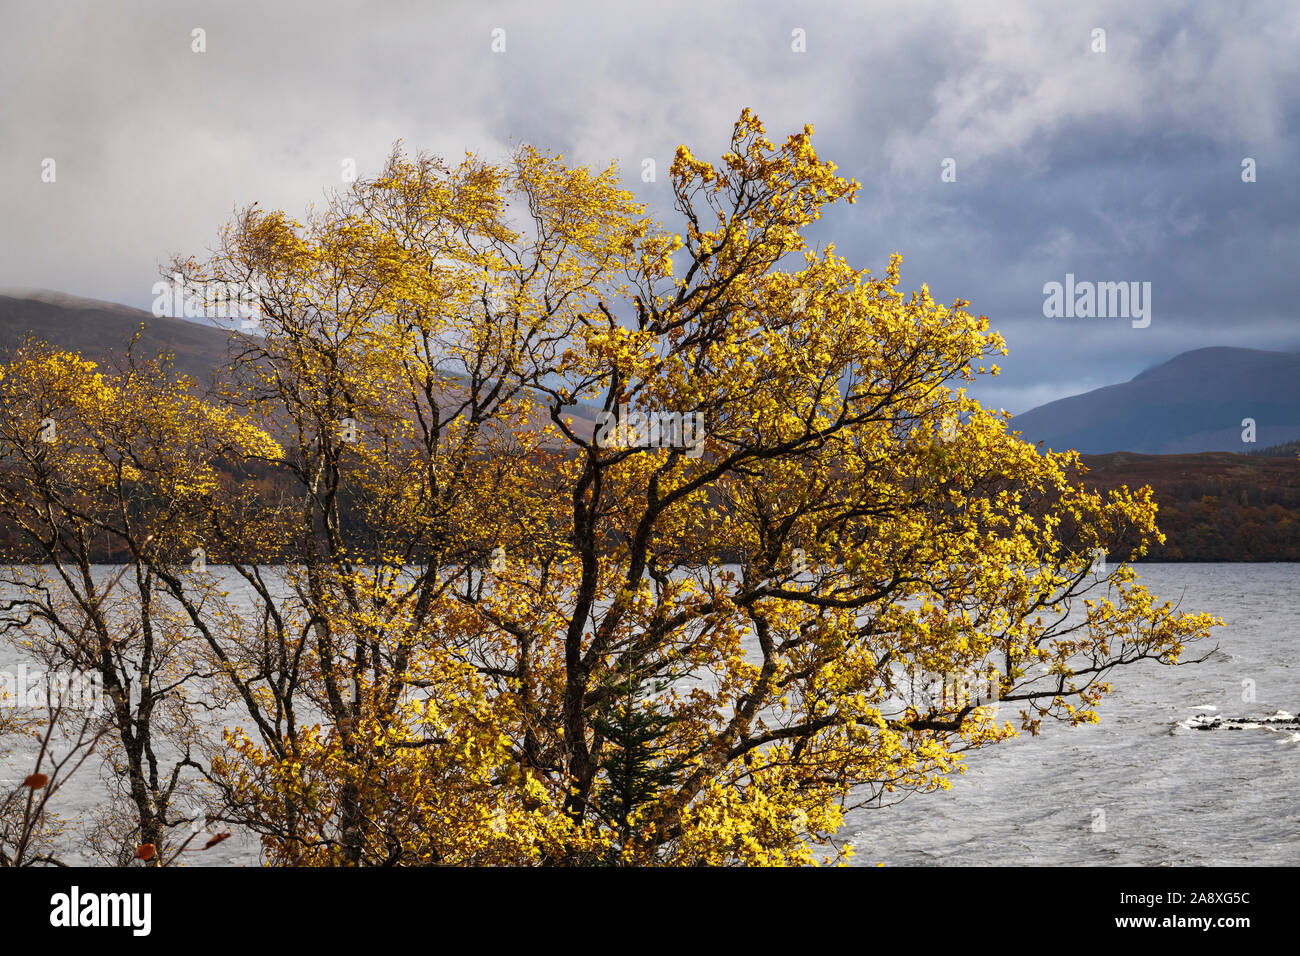 Autumn coloured foliage on the shores of Loch Lochy in Lochaber near Fort William, Scotland. 4 November 2019 Stock Photo